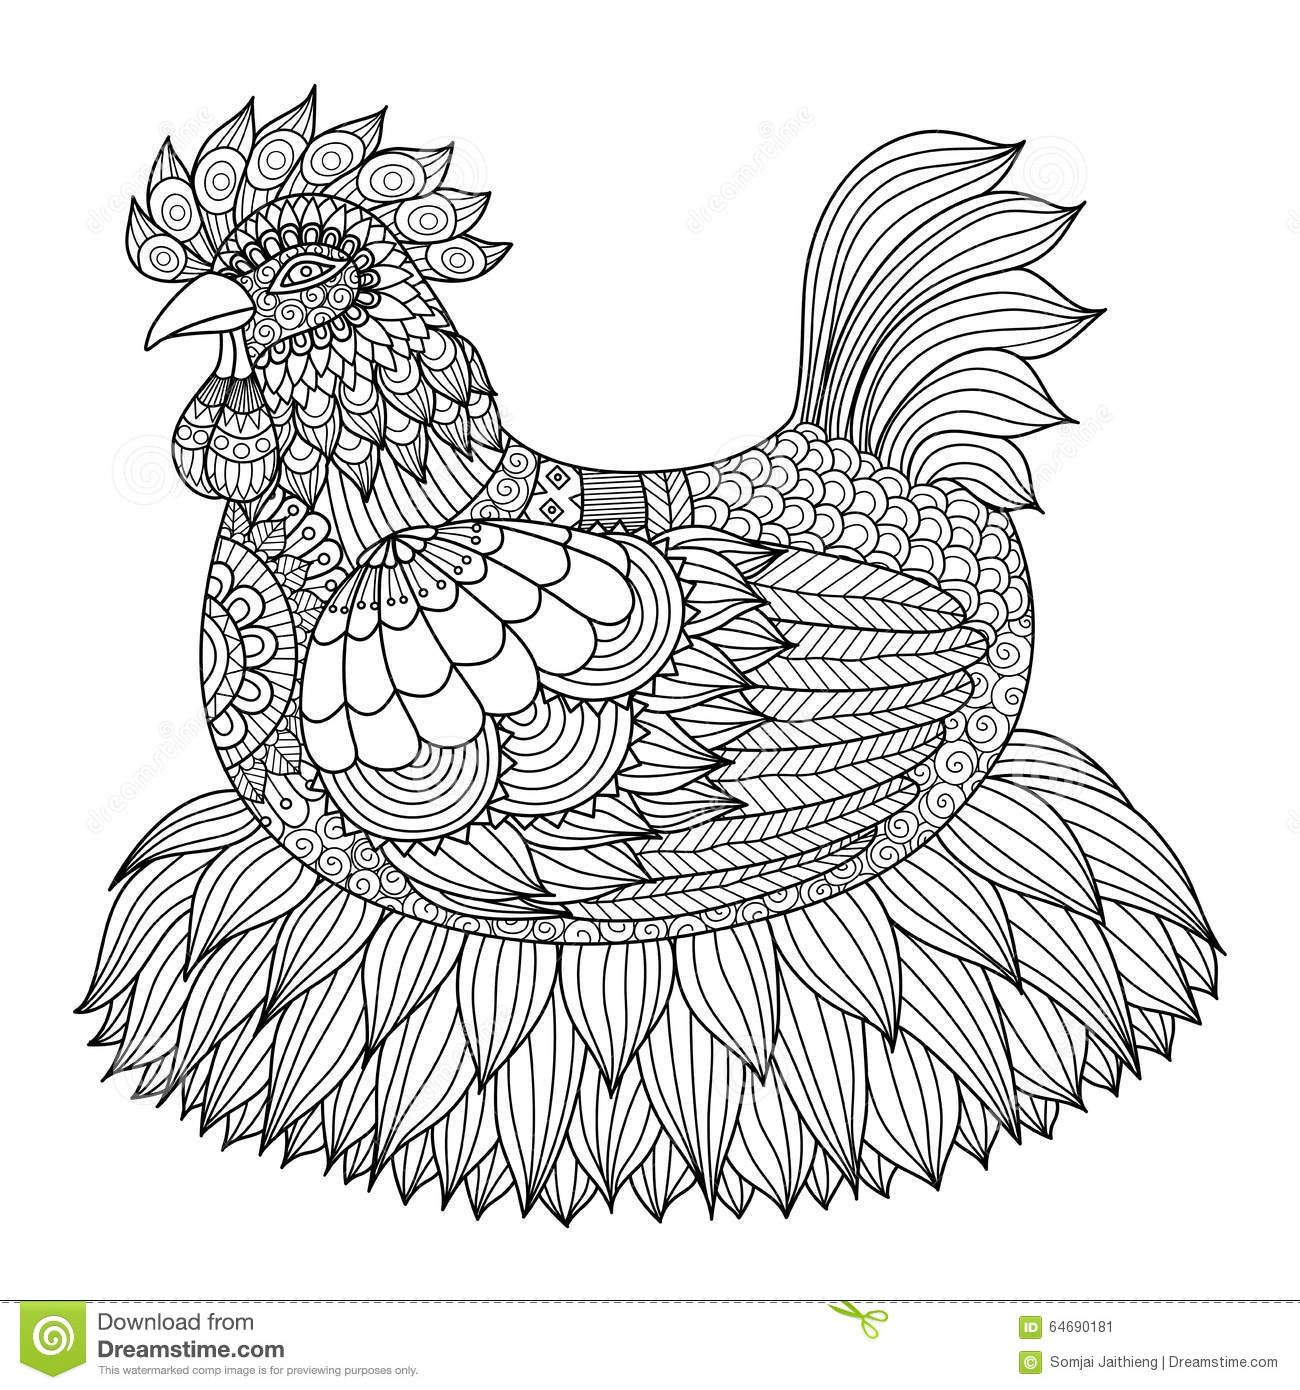 Chicken Coloring Pages For Adults
 Hand Drawn Zentangle Chicken For Coloring Book For Adult